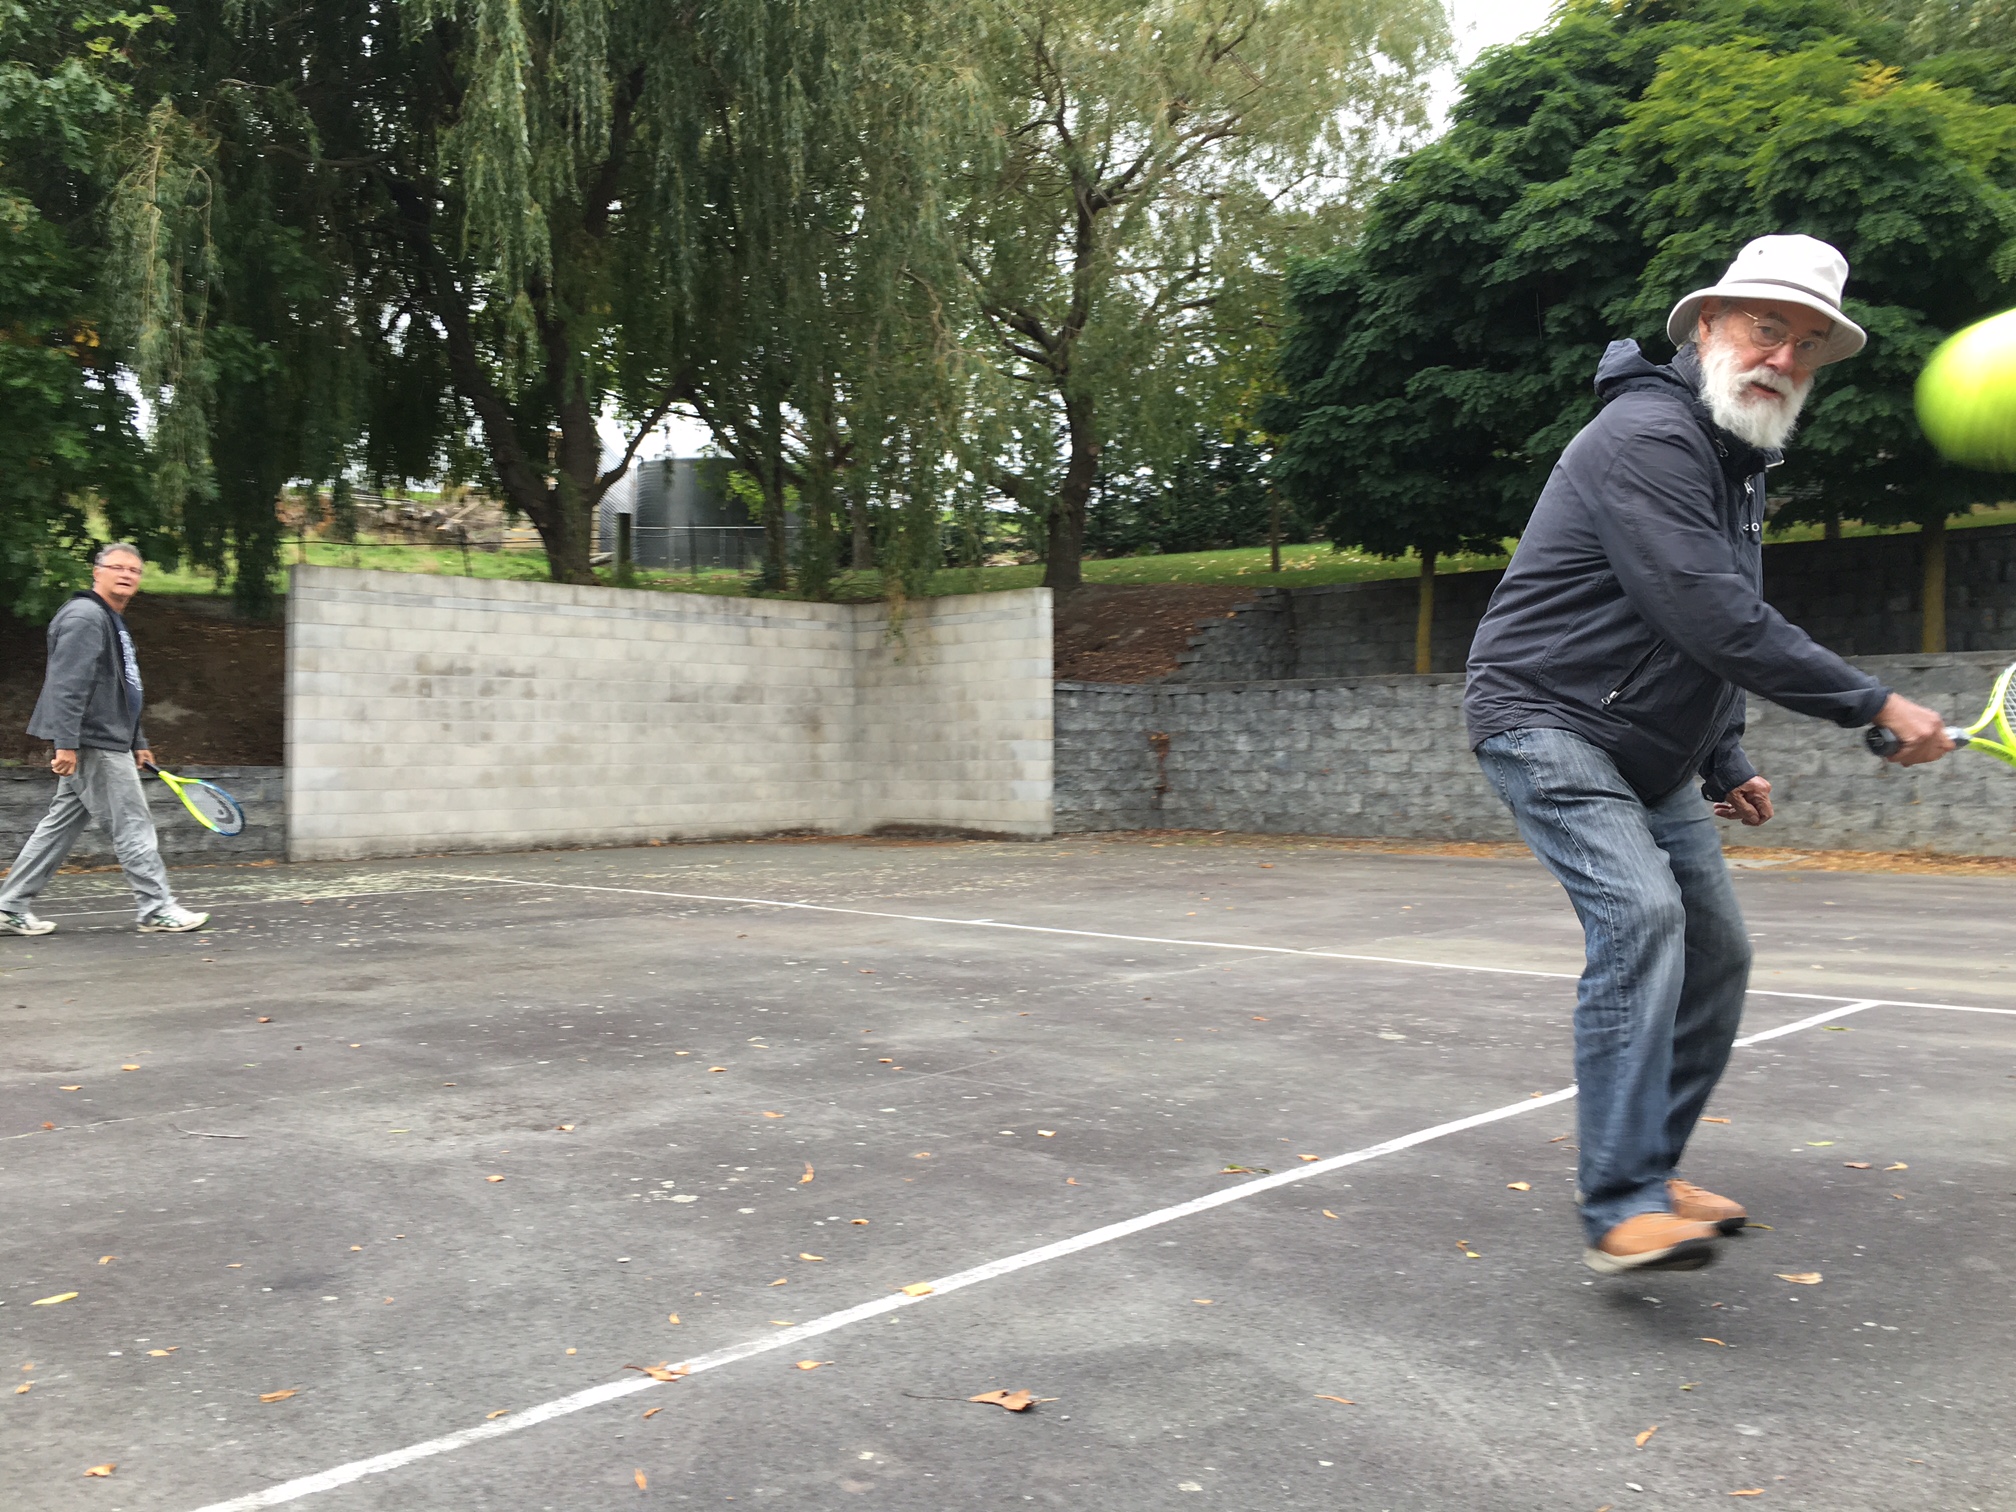 Ron Mcburnie and Kevin Connor on the tennis court at Giverny